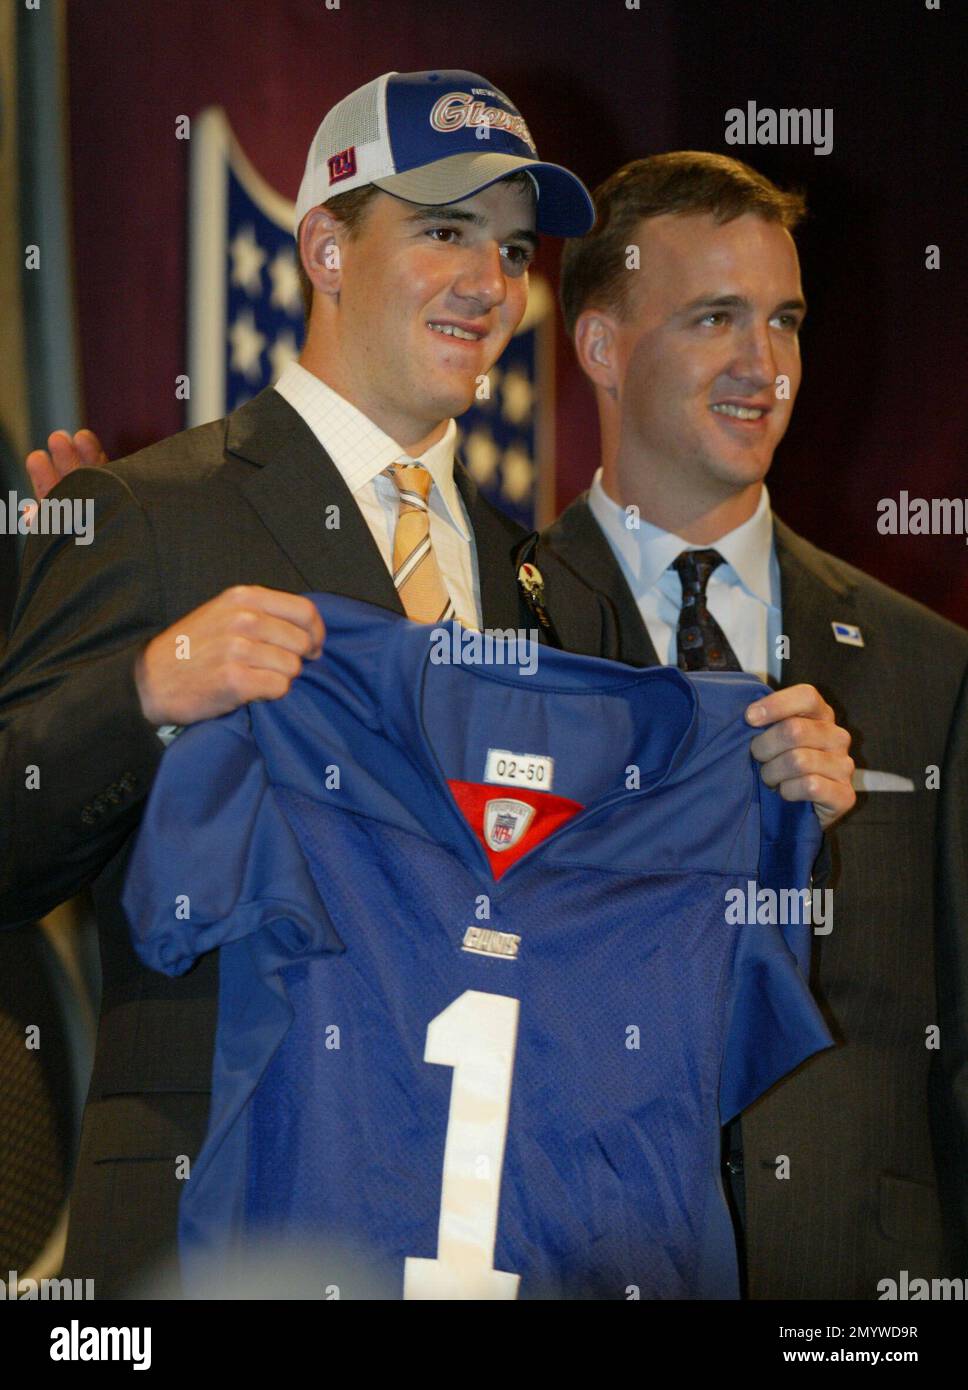 FILE - In this April 24, 2004 file photo, Eli Manning, quarterback from  Mississippi, holds up a New York Giants jersey while standing next to his  brother Peyton, quarterback for the Indianapolis